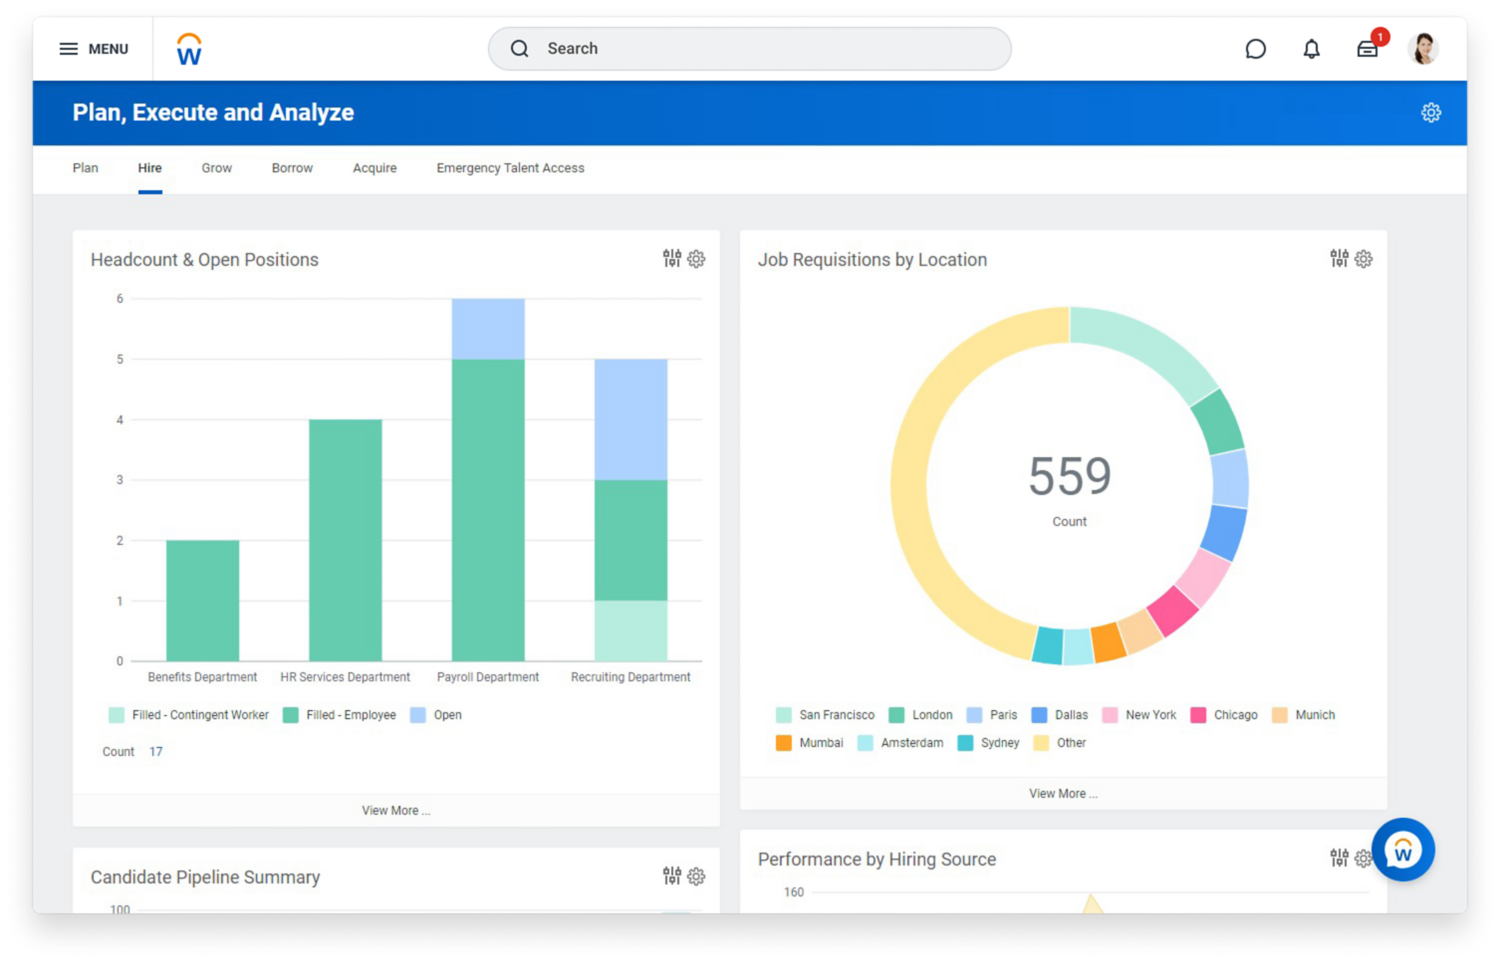 Workday Adaptive Planning-dashboard 'Continuous Talent Planning'. 